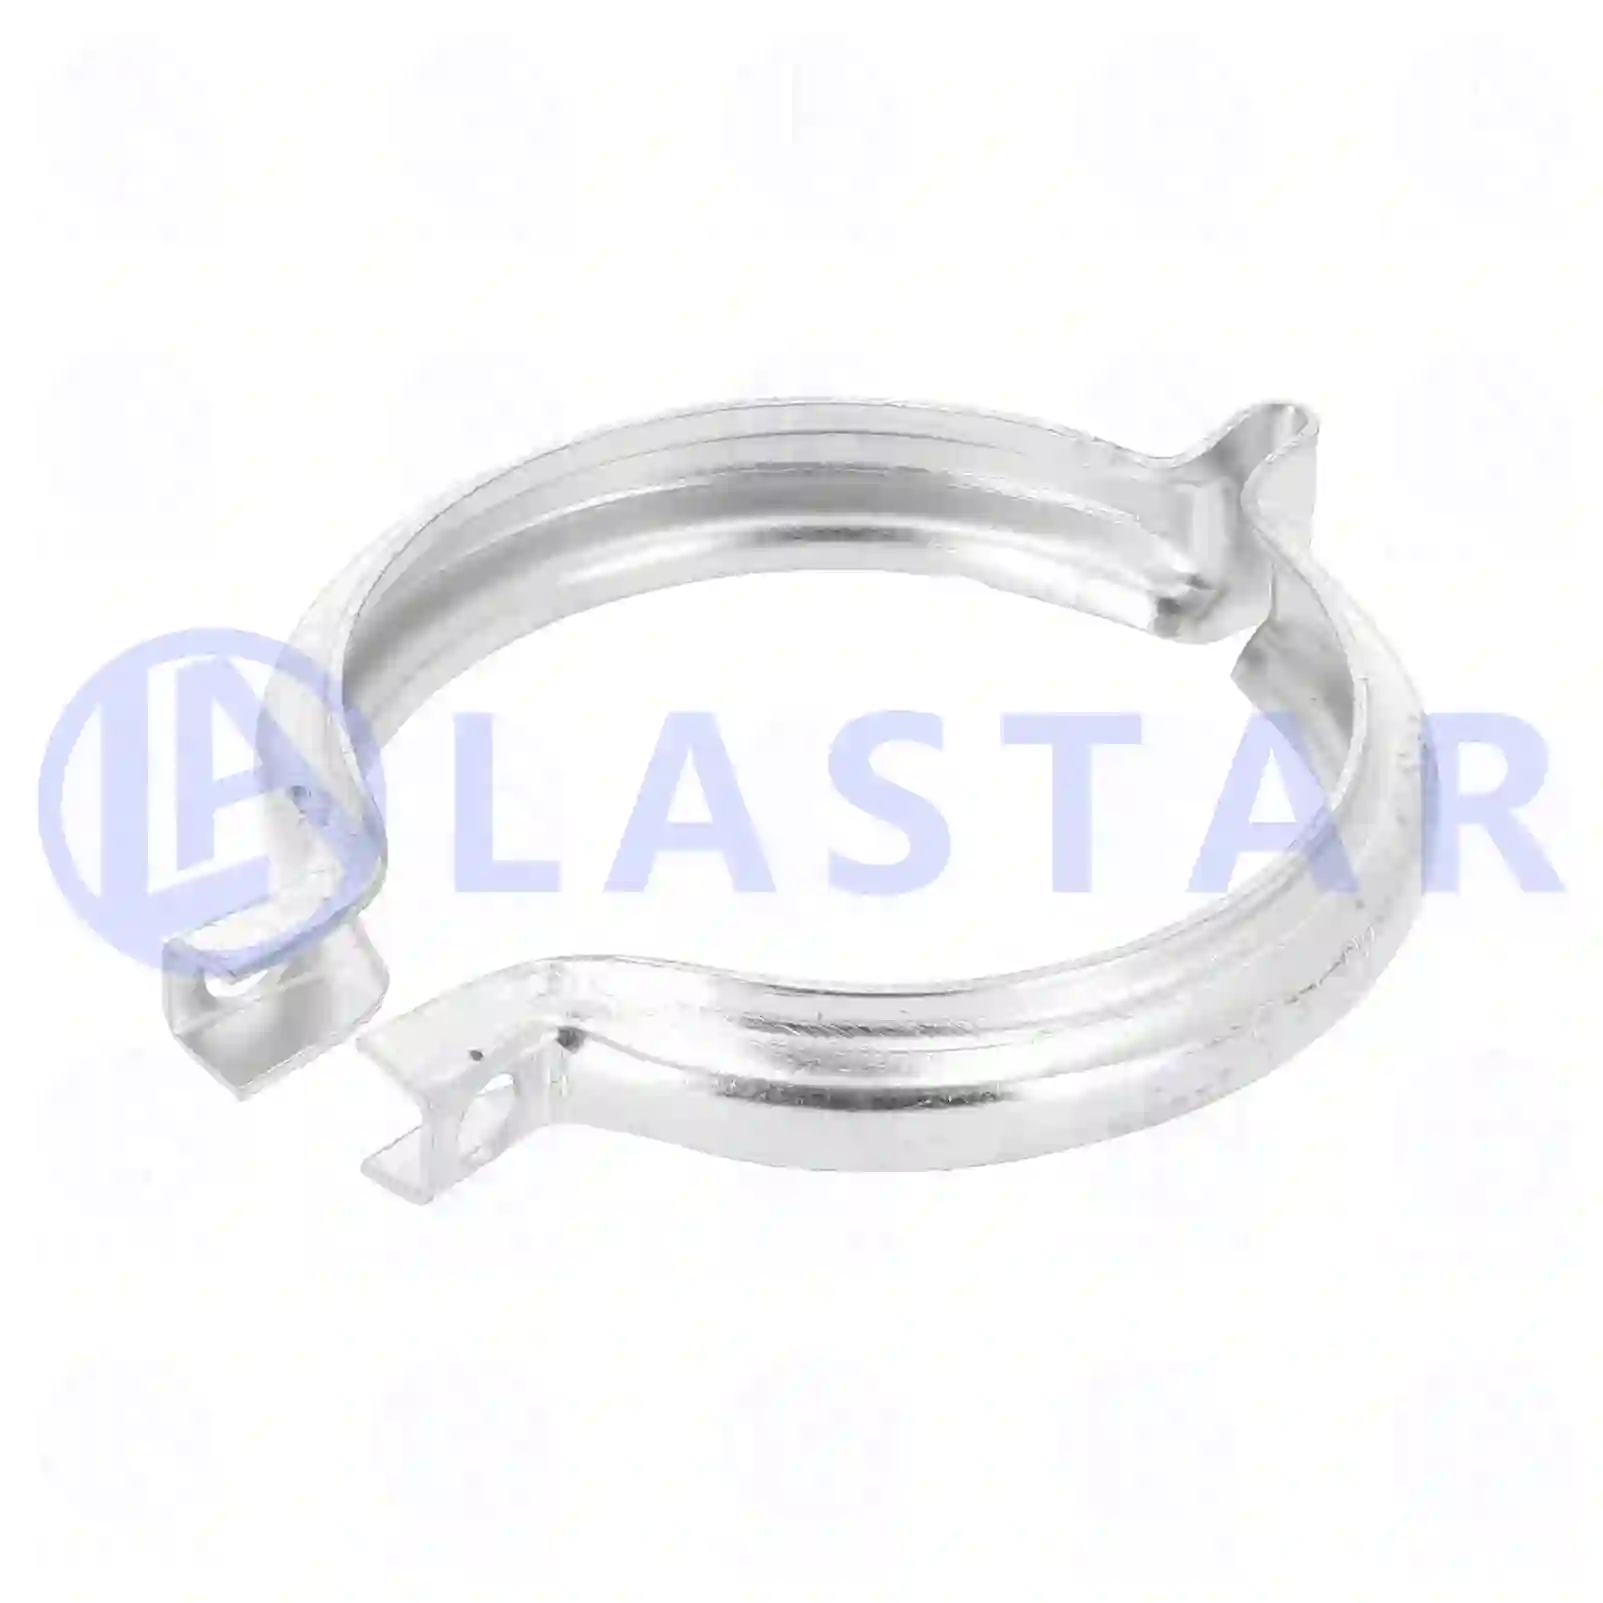 Clamp, 77706710, 3033054, 9522798, ZG10262-0008 ||  77706710 Lastar Spare Part | Truck Spare Parts, Auotomotive Spare Parts Clamp, 77706710, 3033054, 9522798, ZG10262-0008 ||  77706710 Lastar Spare Part | Truck Spare Parts, Auotomotive Spare Parts